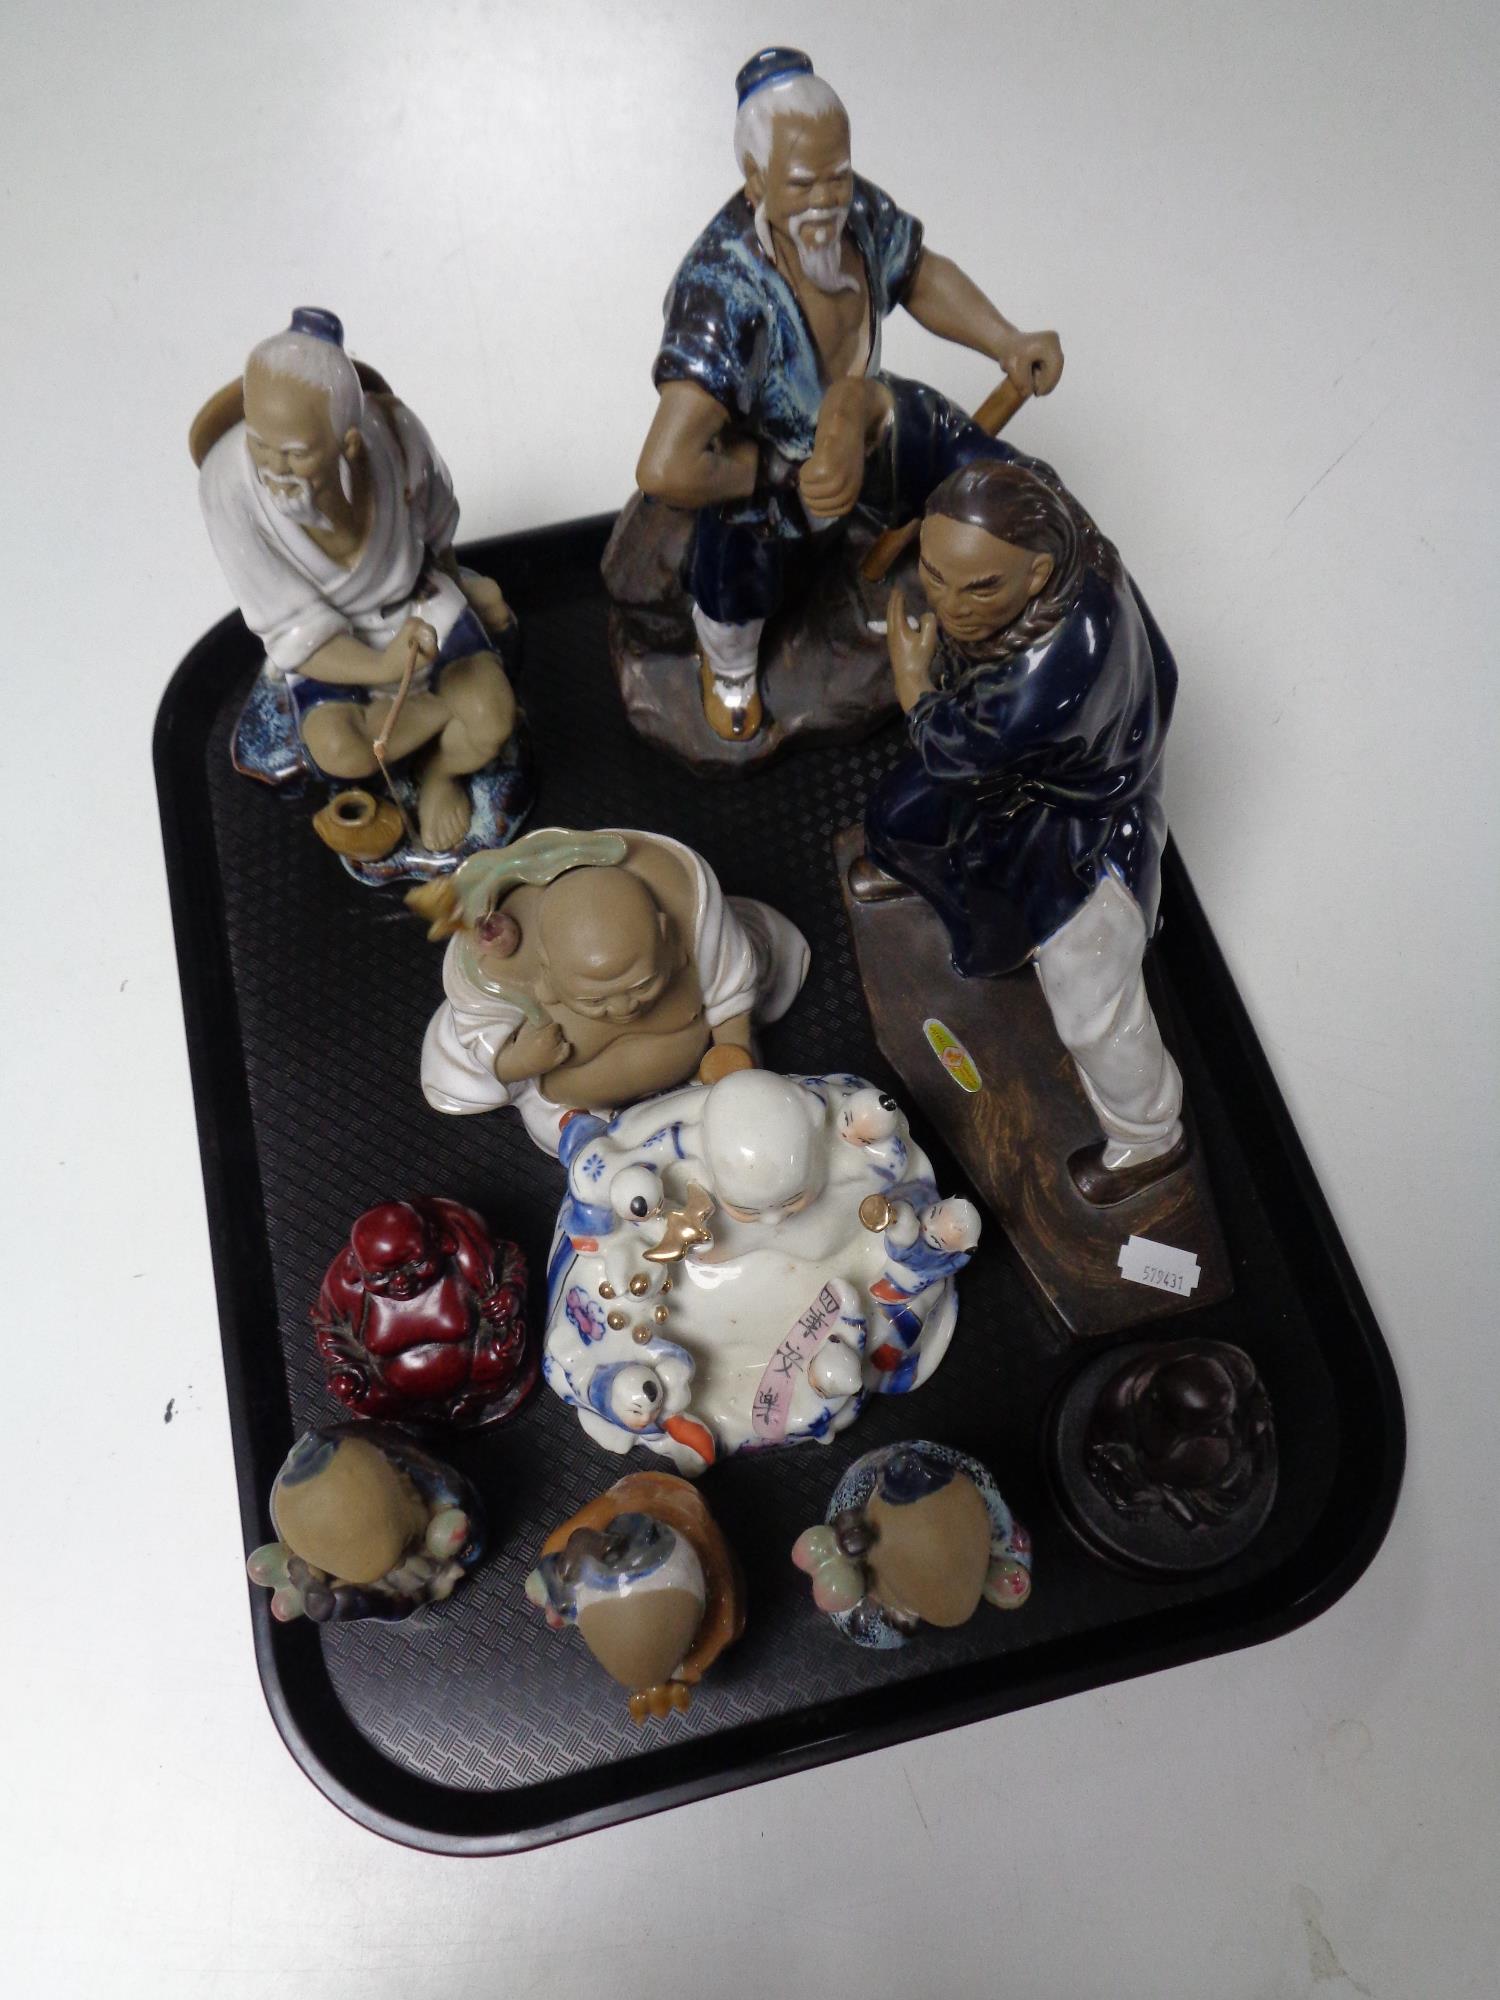 A tray containing Eastern ceramic and resin figures to include Buddha's, fisherman, etc.